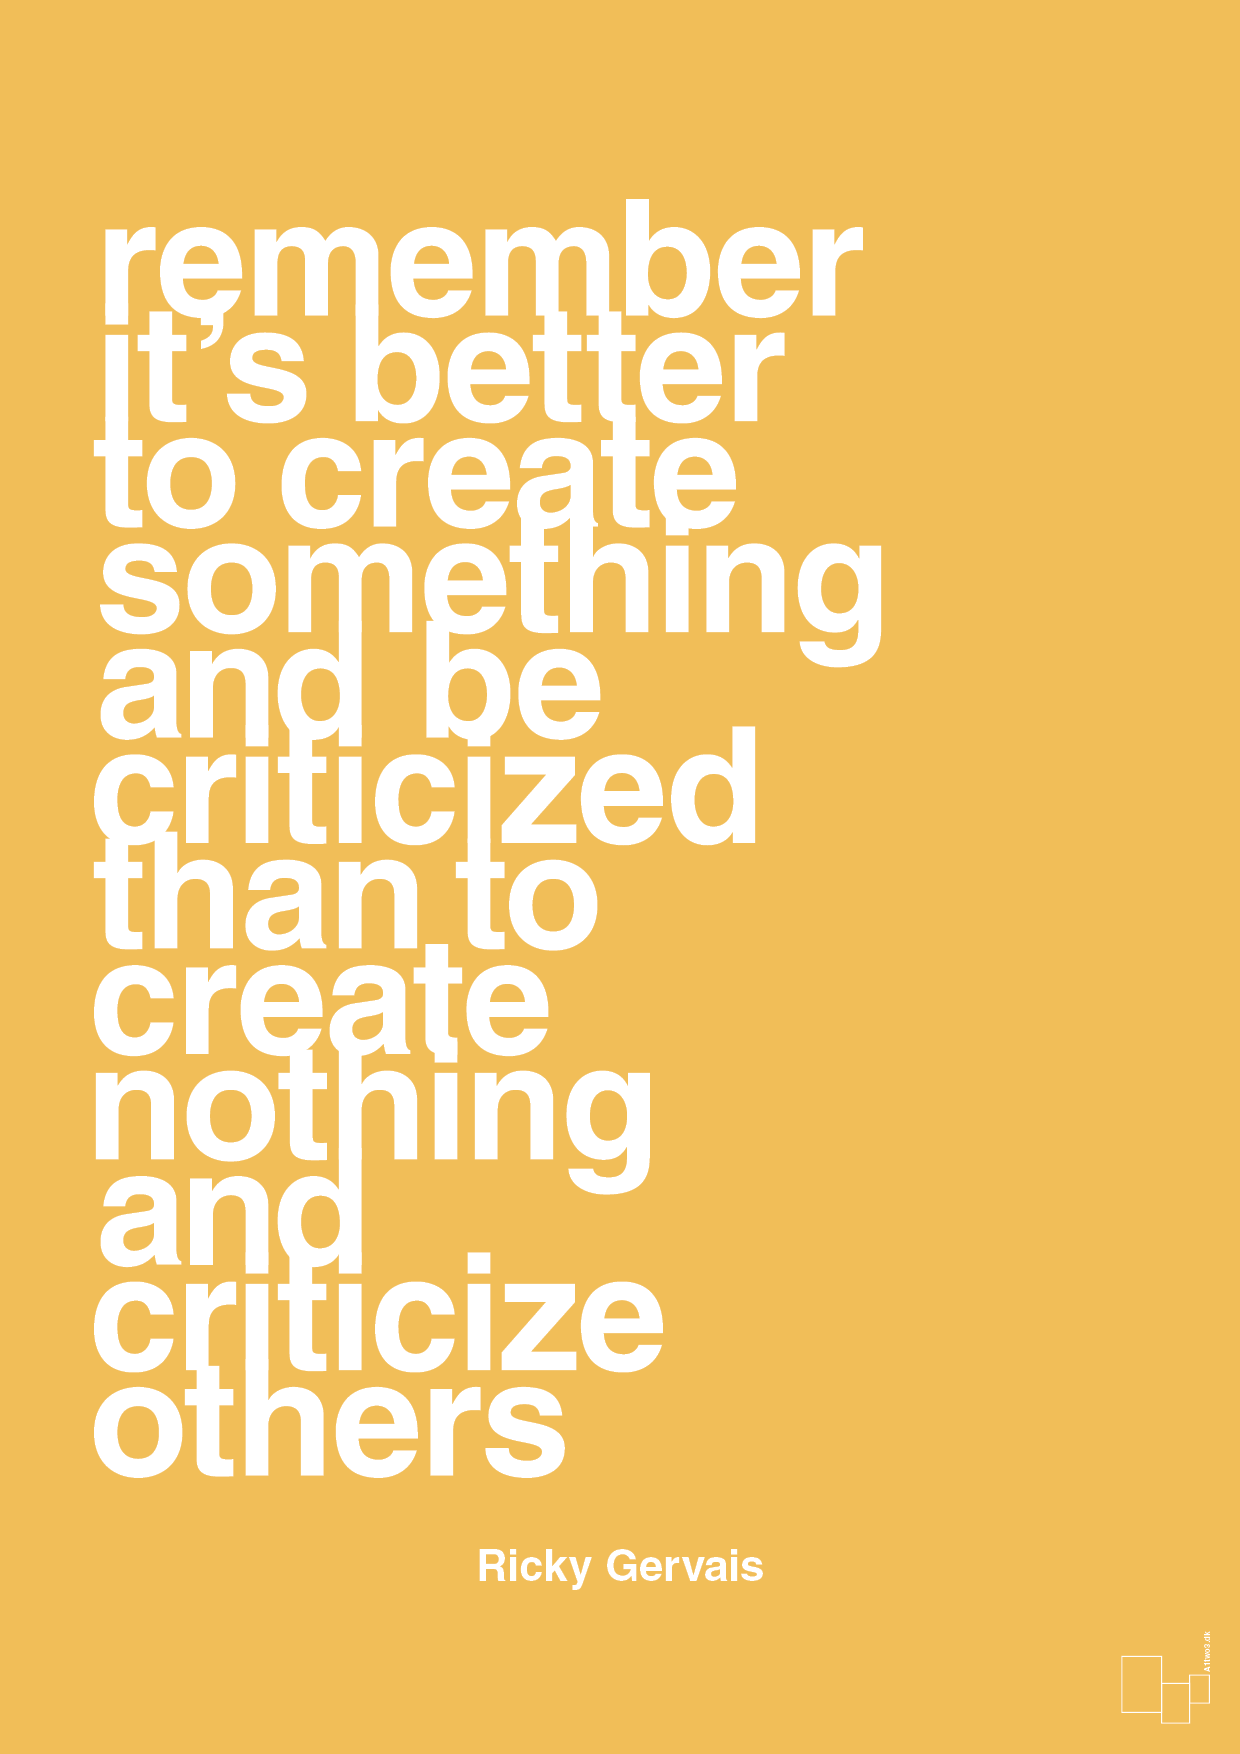 remember its better to create something and be criticized than create nothing and criticize others - Plakat med Citater i Honeycomb